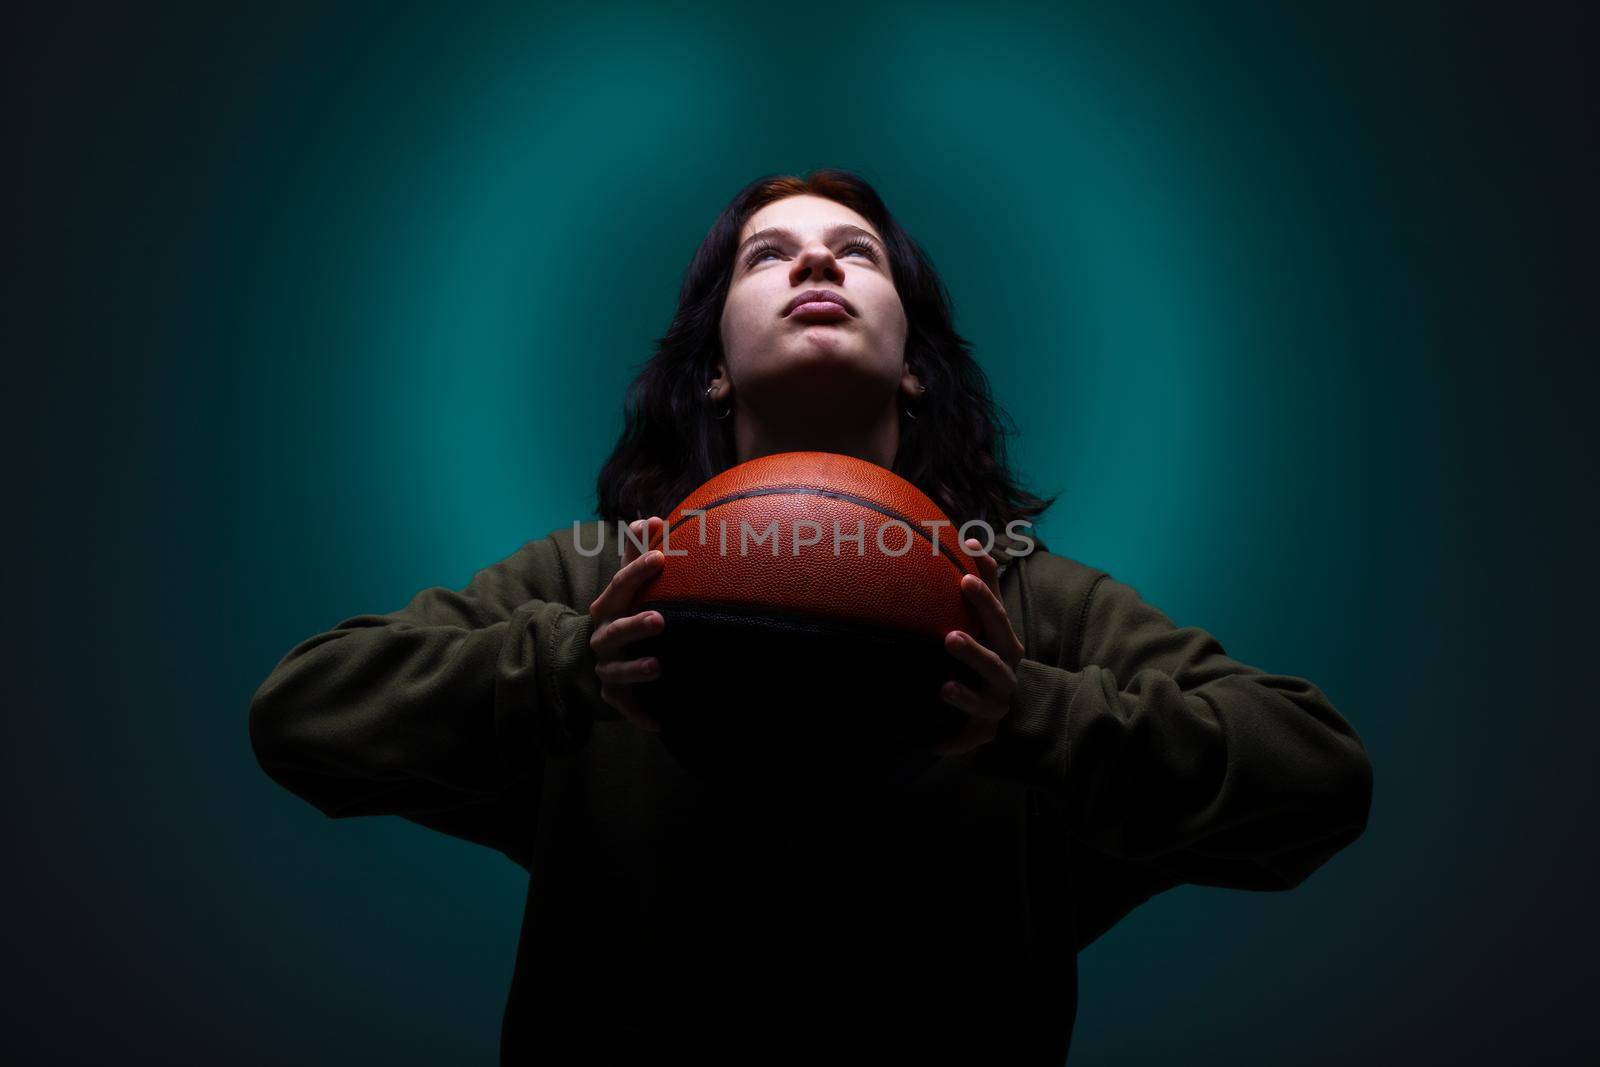 Teenage girl with basketball. Studio portrait with neon blue colored background.. by kokimk